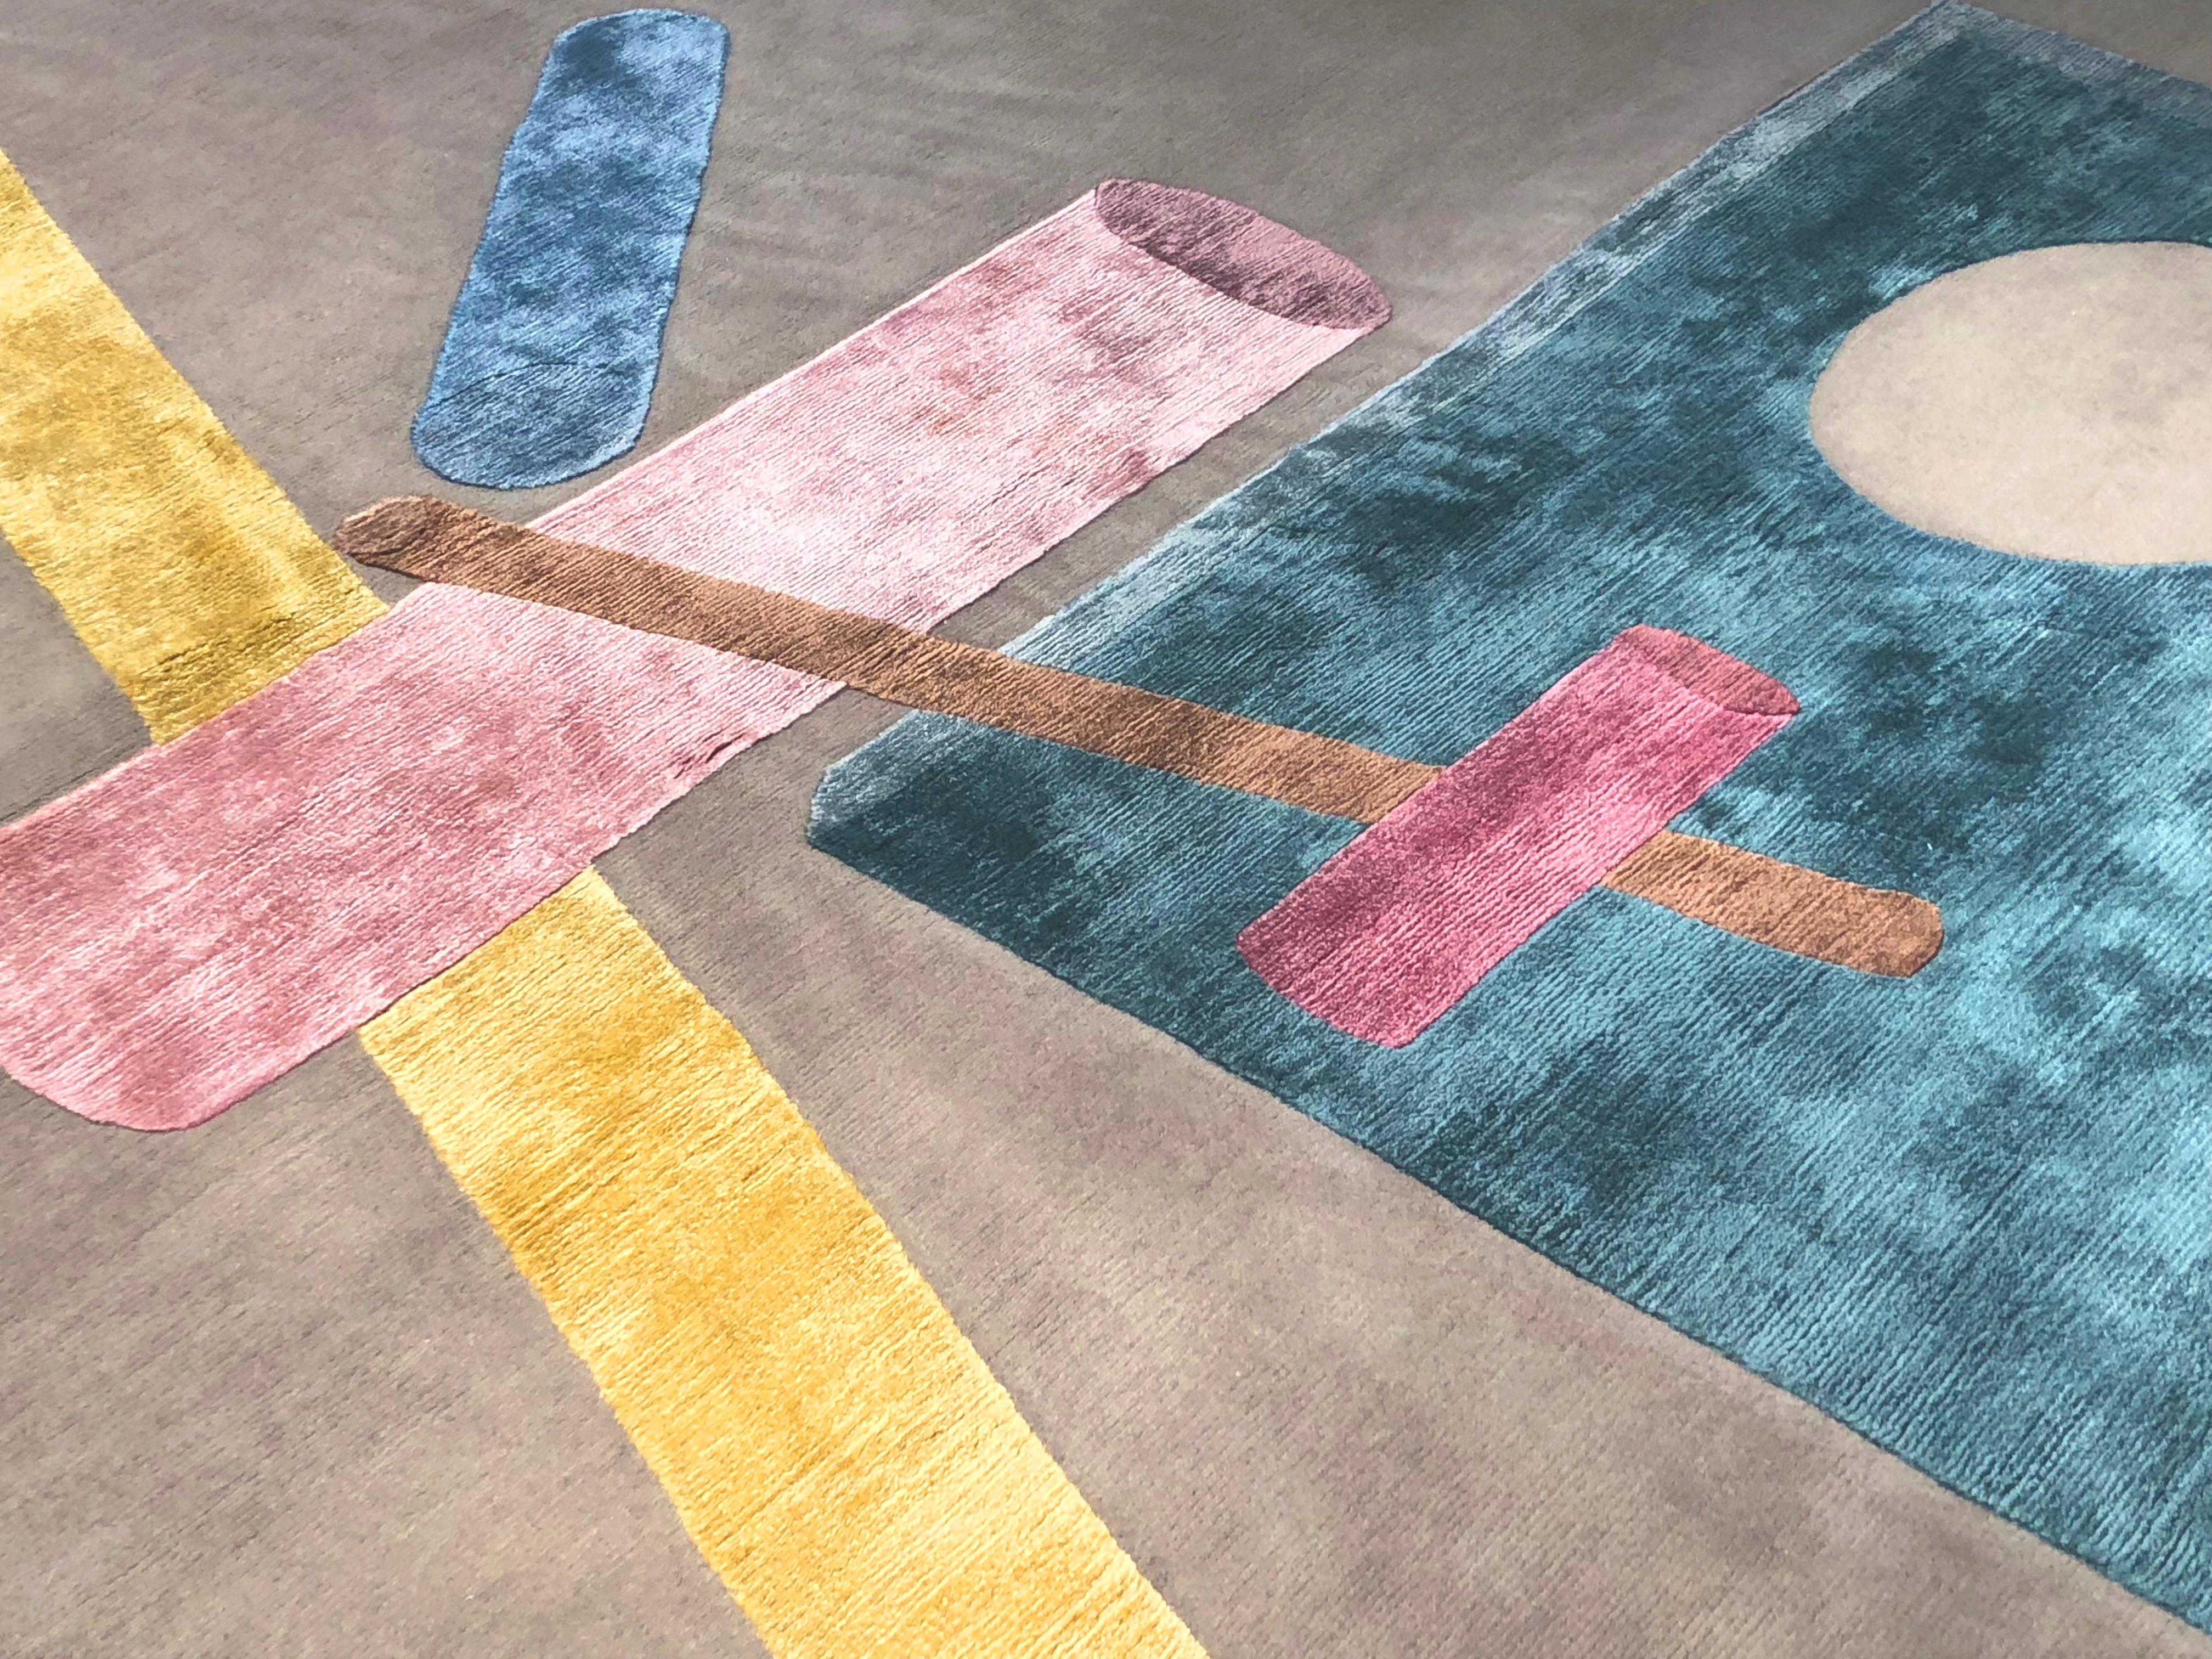 Designed by Fabien Cappello presents a composition of 3D elements translated into a graphical game of forms and shadows. The surface magically acquires volume thanks to forms and colors that create vibrant spatial depth.
This rug is hand knotted in